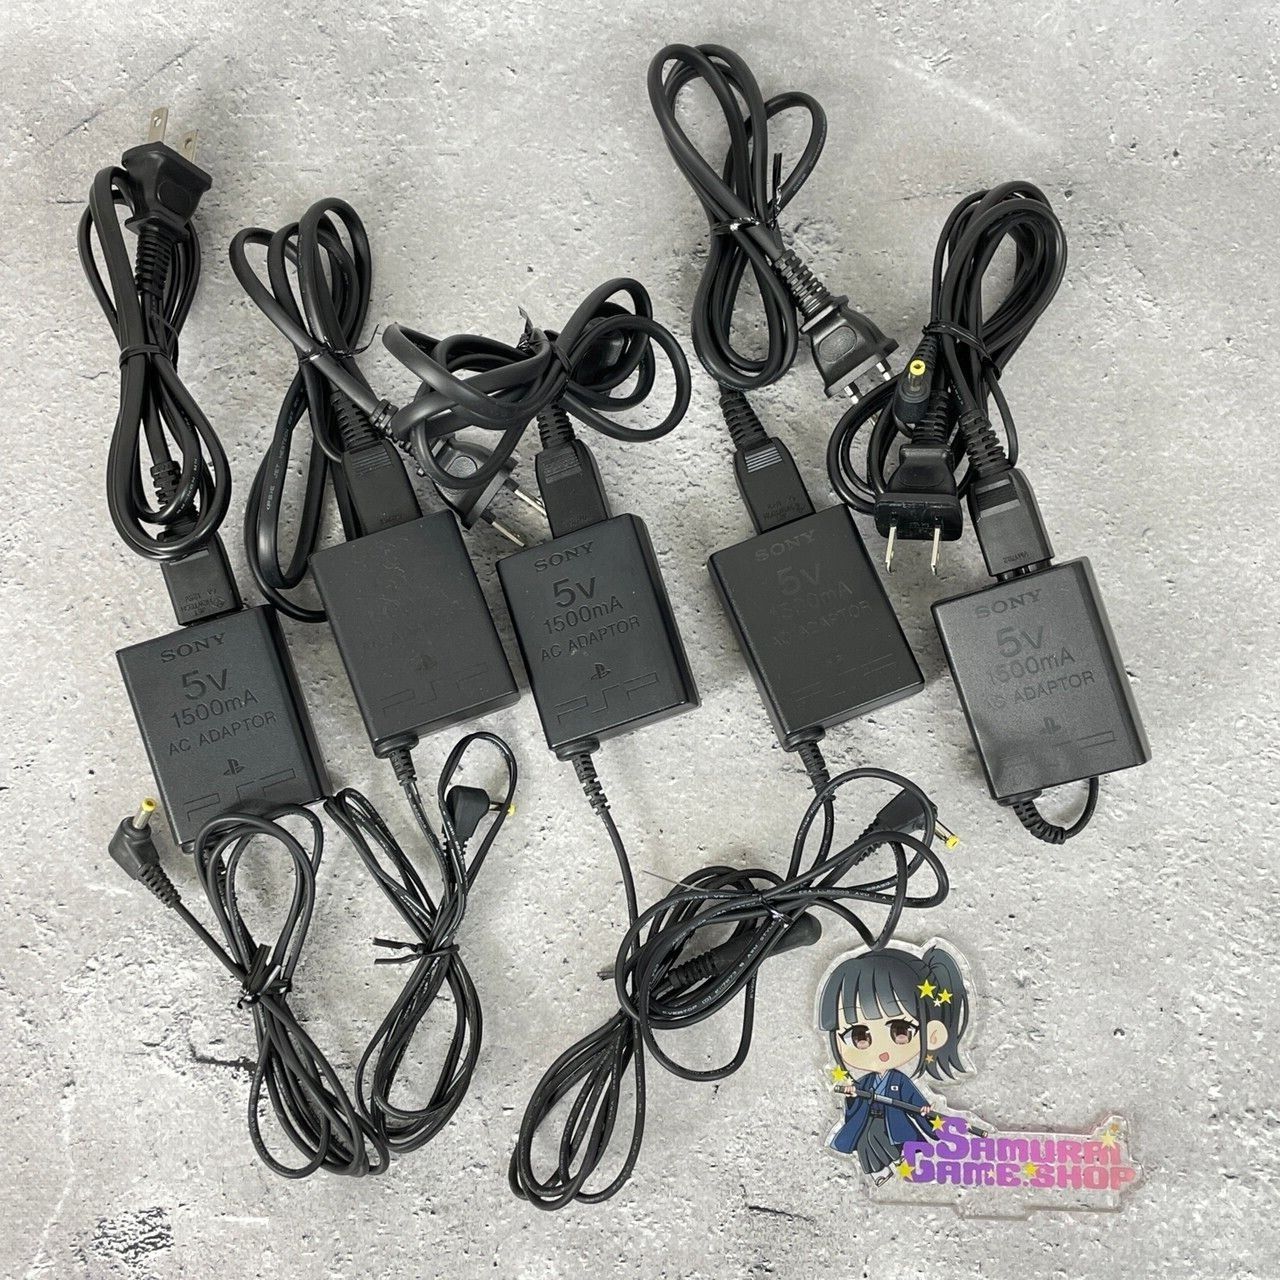 Sony PSP-100 380 Genuine Official Charger Adapter Bulk Sale For 1000 2000 3000